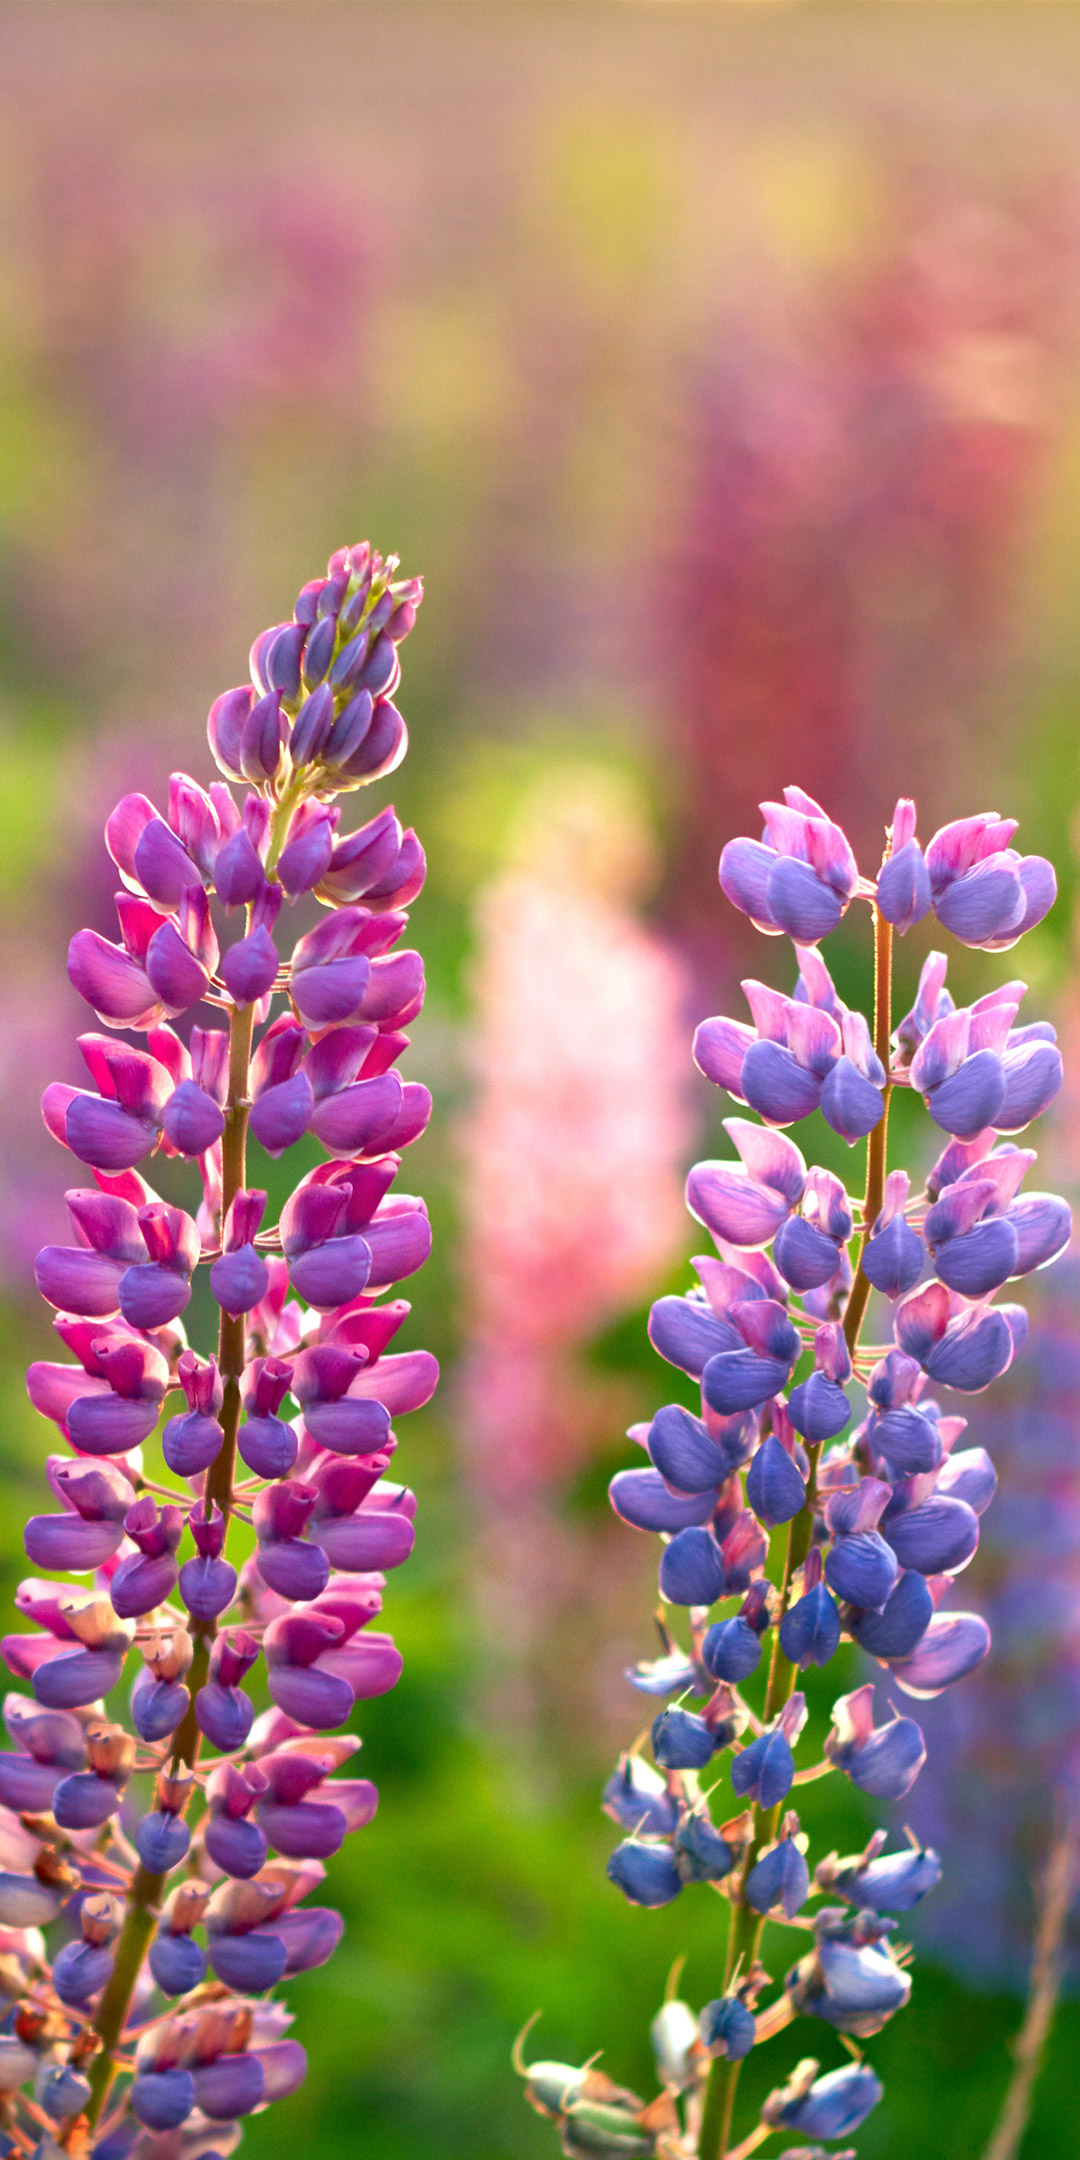 Wild lupines in bloom